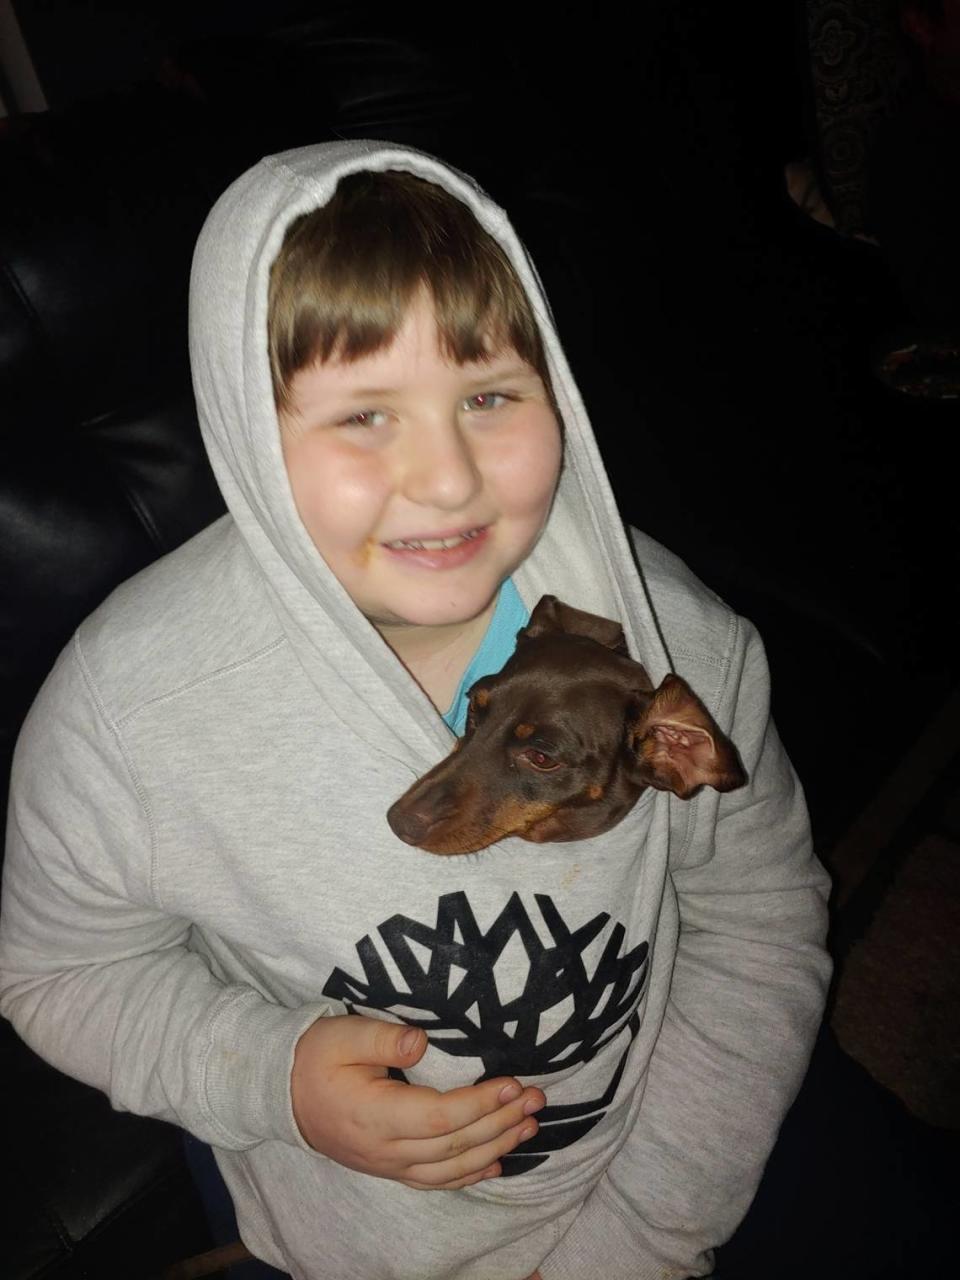 Gage Andrews, 9, shown with his dog Angel, is at the center of a new lawsuit alleging years of abuse by his former special education teacher in Statesville.